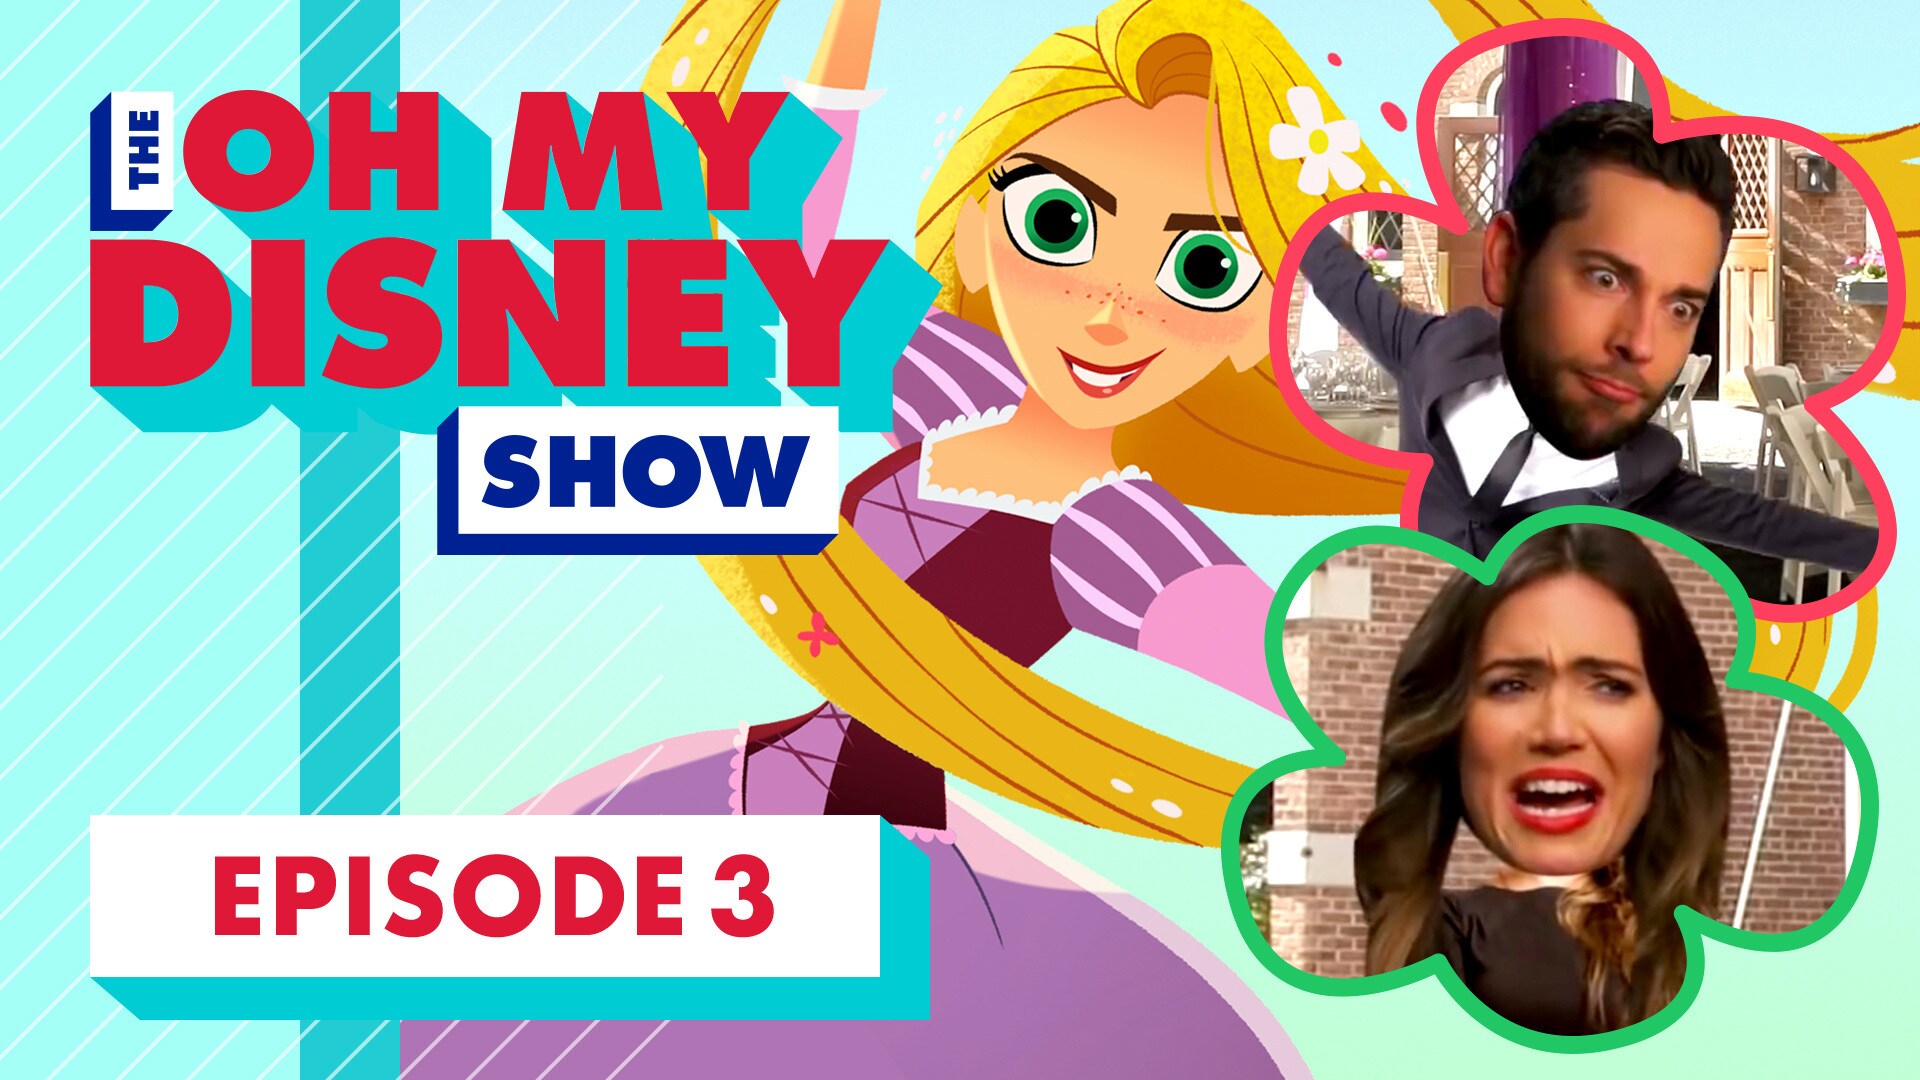 The Oh My Disney Show: Mandy Moore, Zachary Levi, and Temecula Road